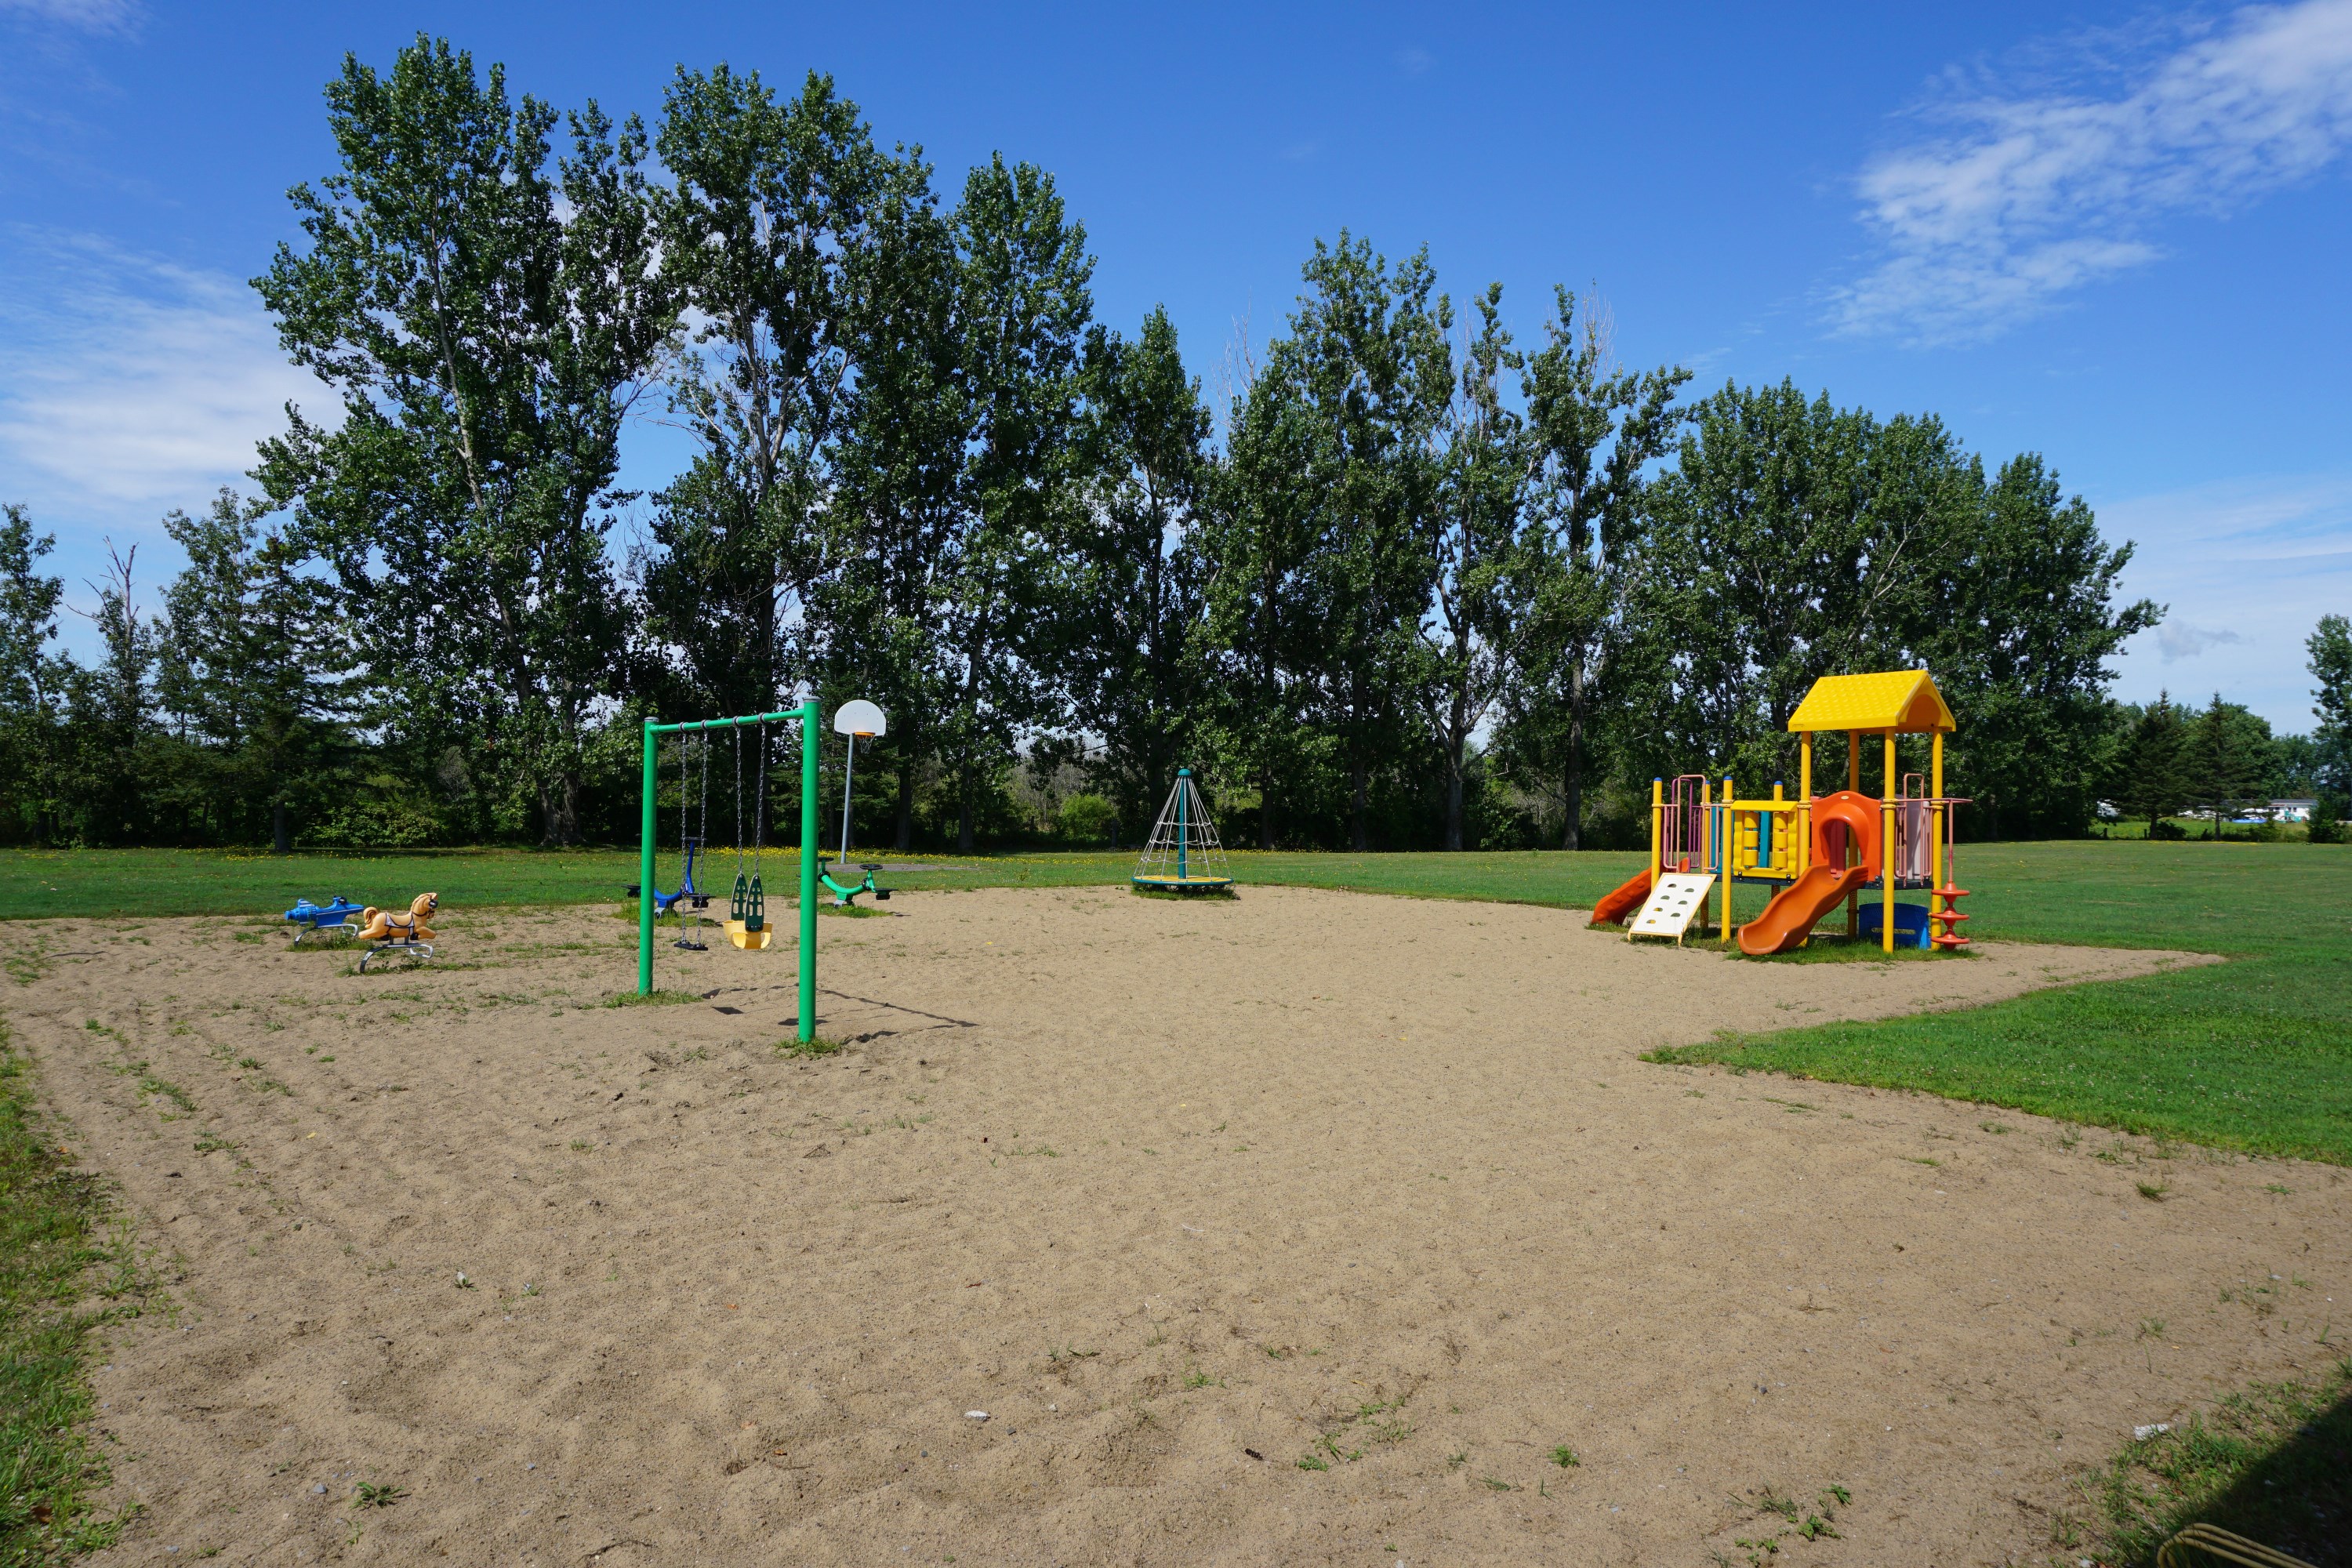 View of the Treadwell playstructure